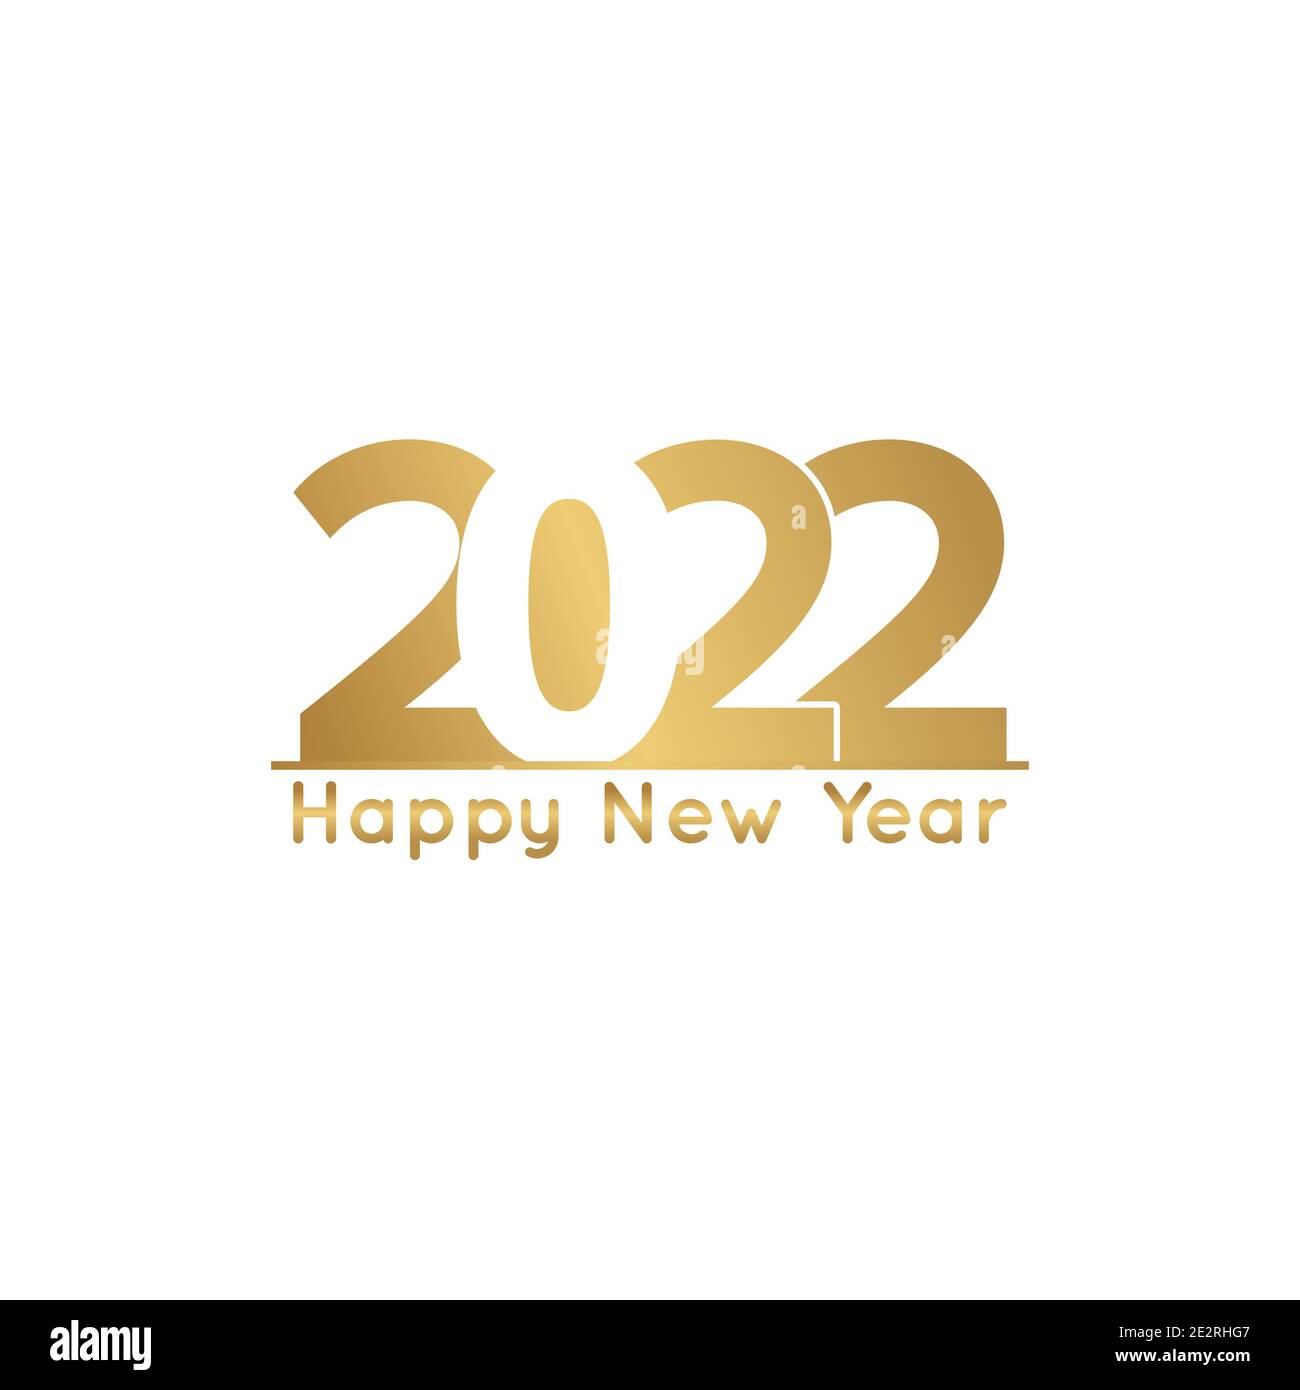 2022 vector illustration letter type icon, happy new year 2022 logo design Stock Vector